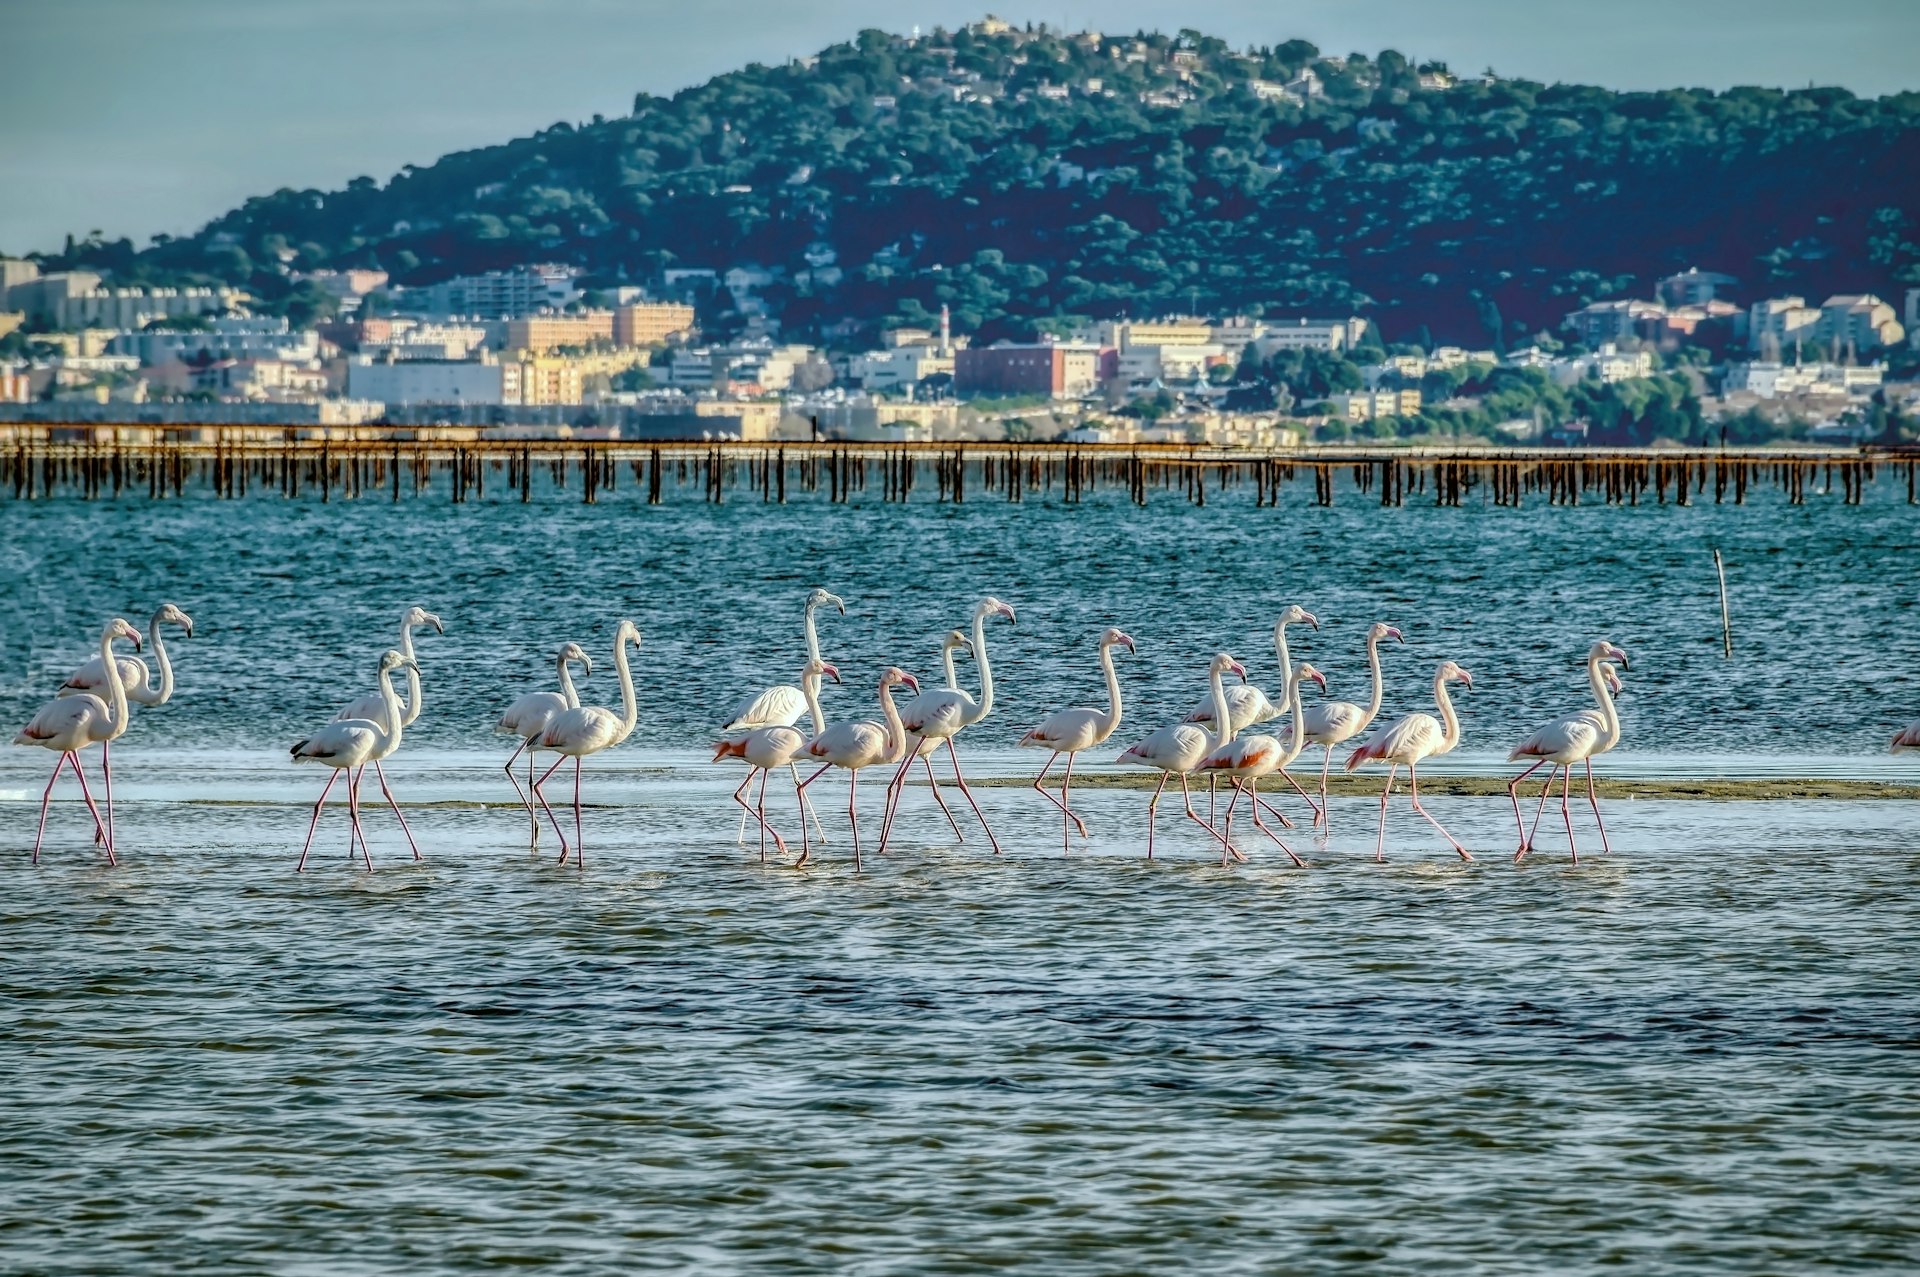 A flock of flamingos stand in the Étang de Thau lake with the town of Sète in the background;